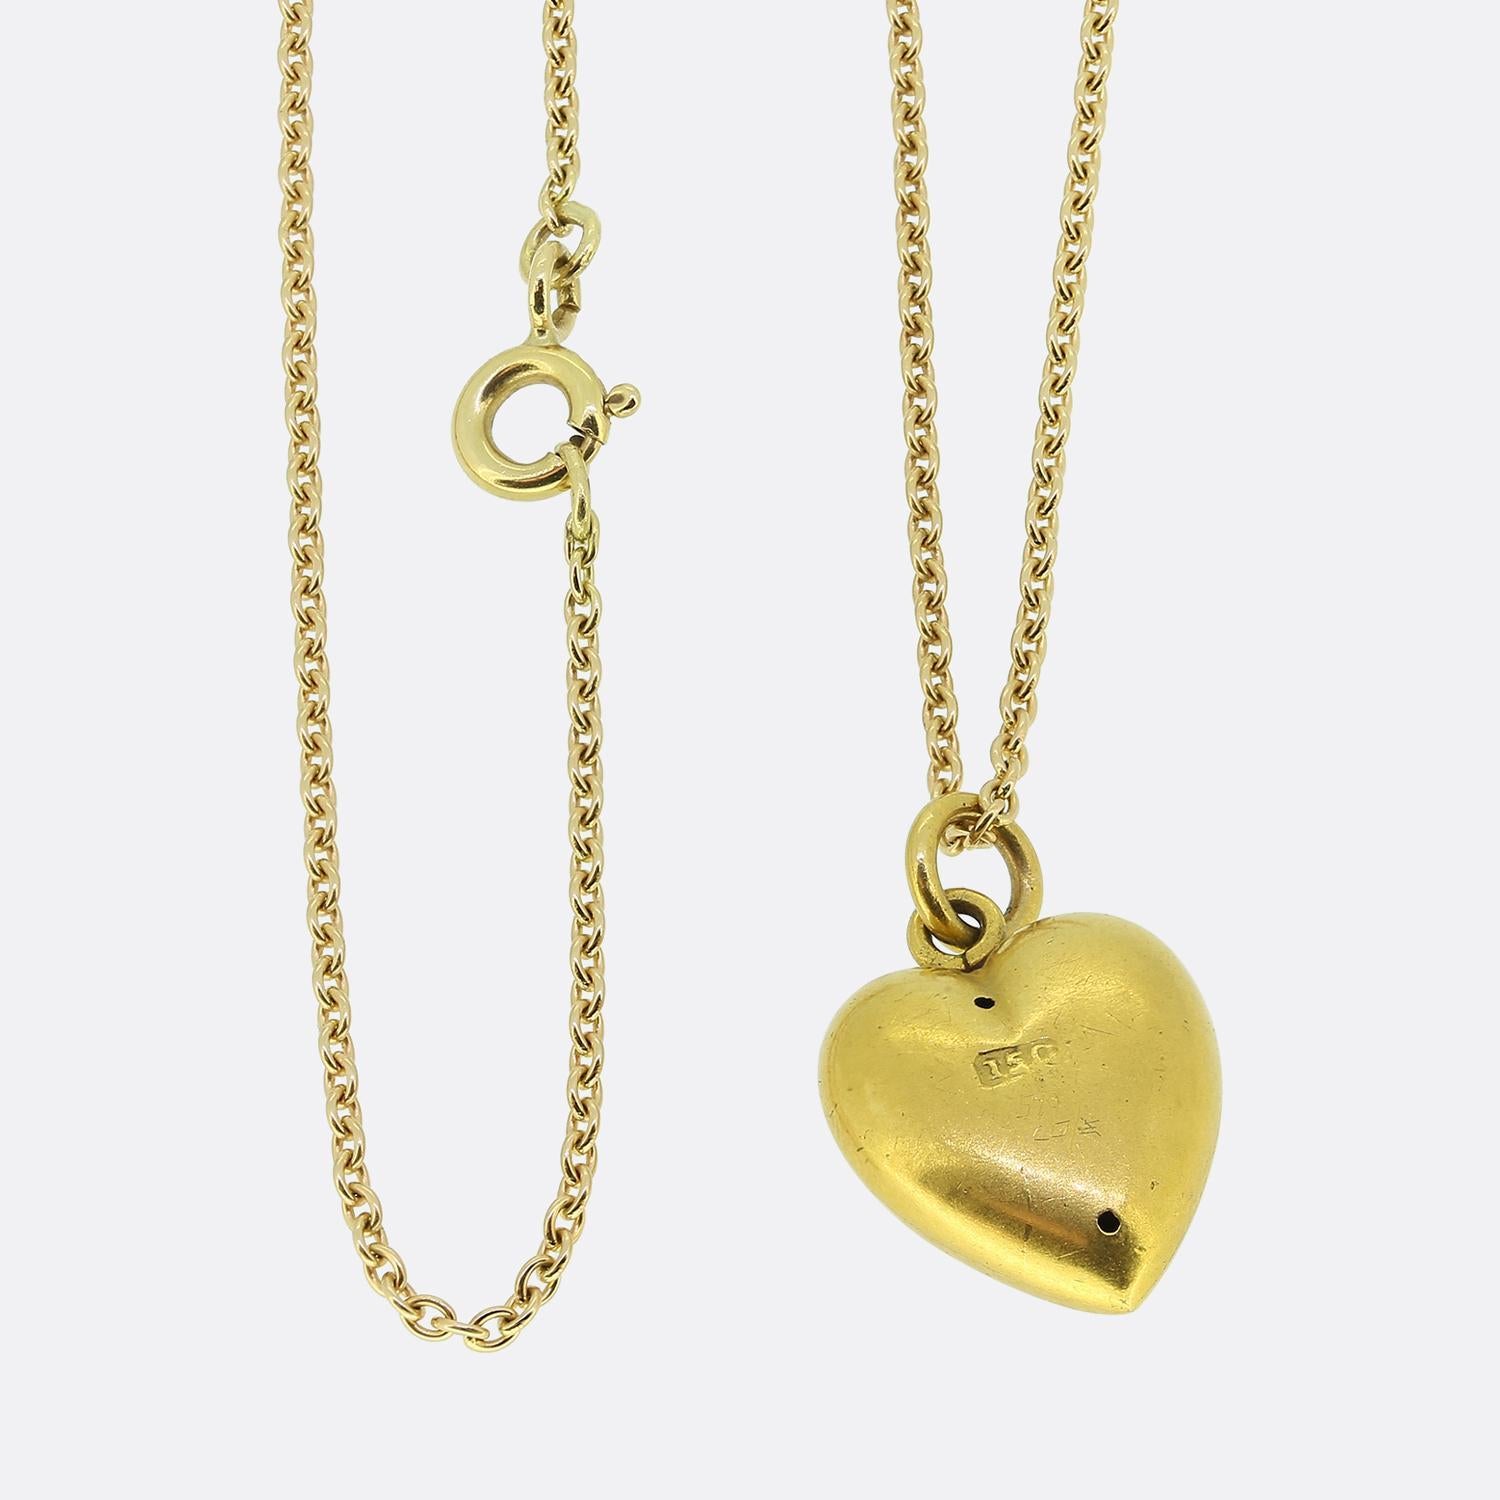 Here we have a charming pearl pendant necklace. This antique pendant has been crafted from 15ct yellow gold into the the shape of a little love heart and expertly set with a single round shaped natural pearl at the centre. This focal stone has been